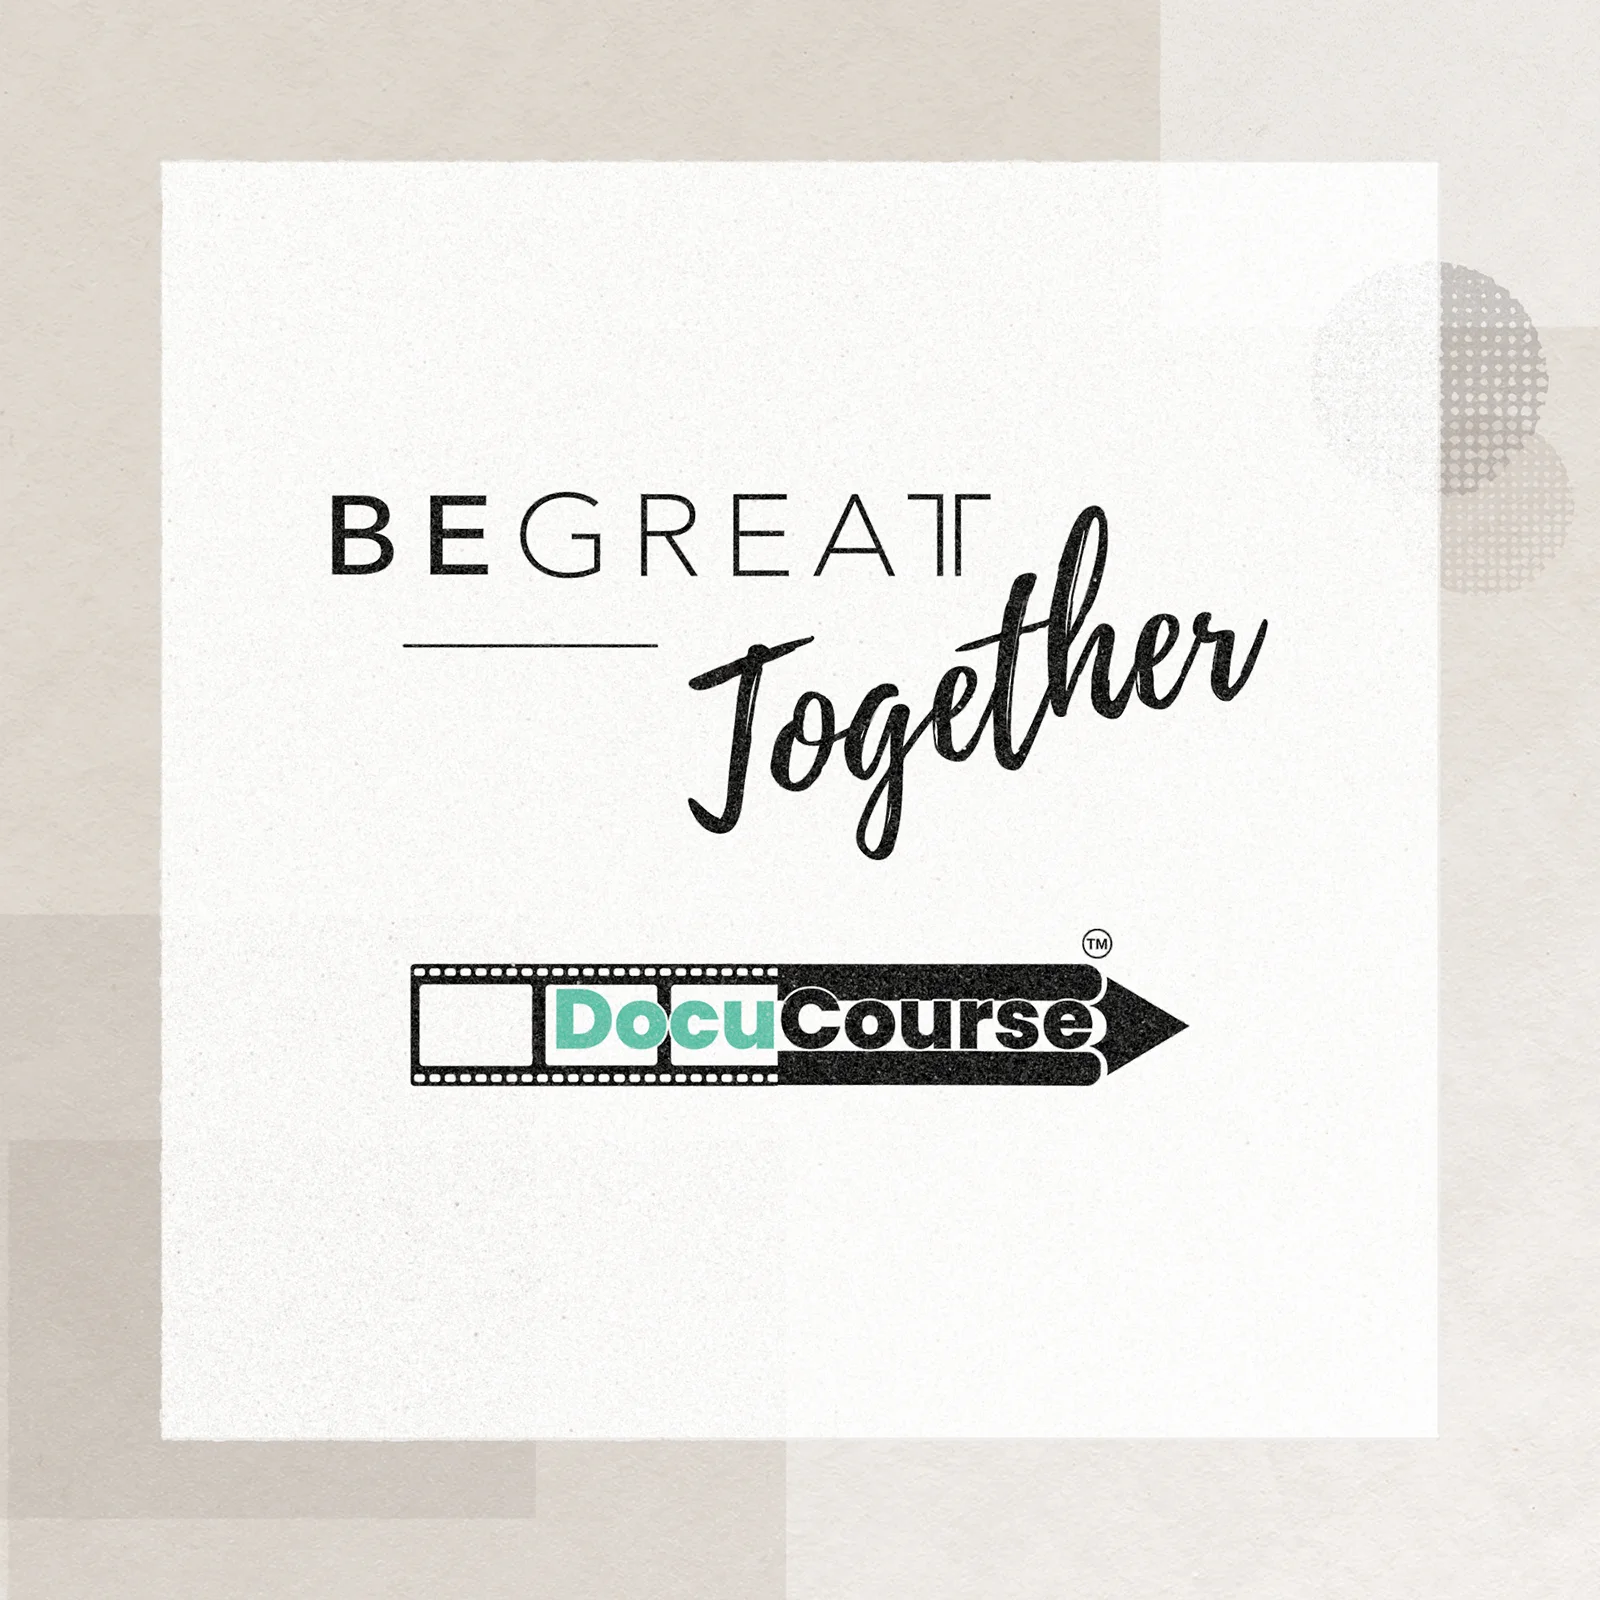 Be Great Together + DocuCourse